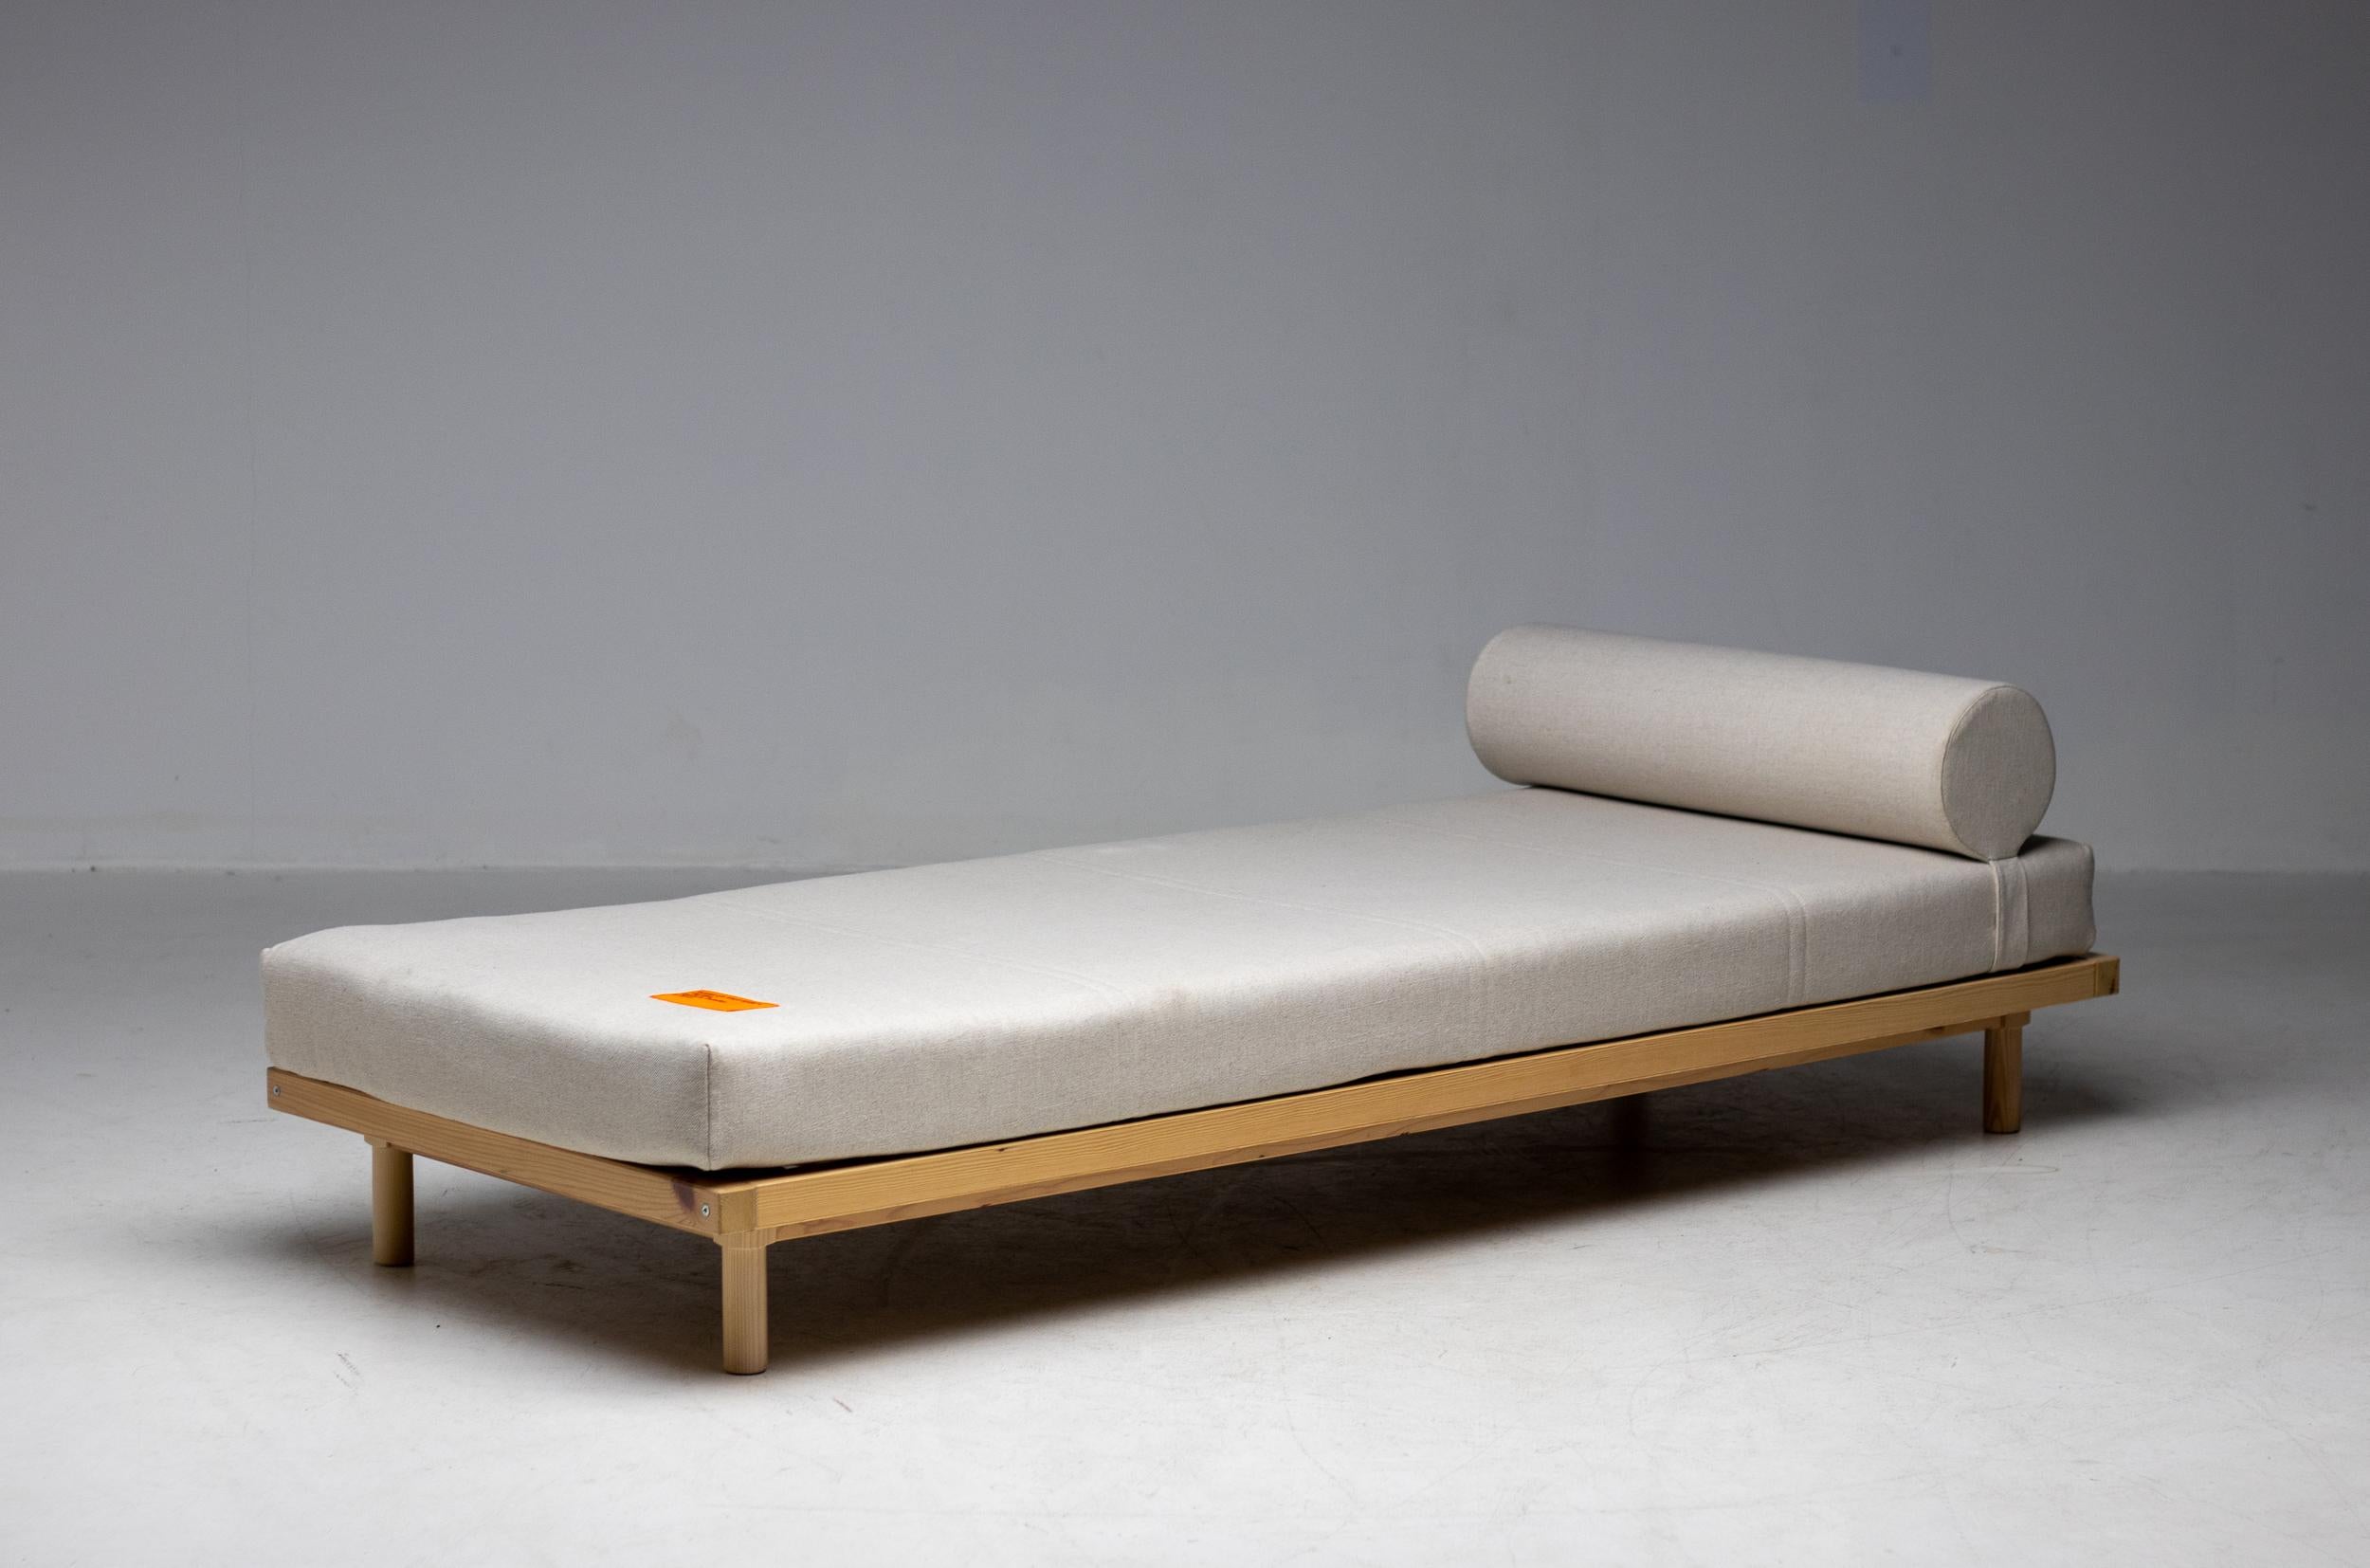 Daybed designed in 2019 by Virgil Abloh for Ikea, Sweden.
Marked with label.

Virgil Abloh was a multi-talented designer, artist, and creative director who has made a significant impact in the world of fashion and design. He is best known as the